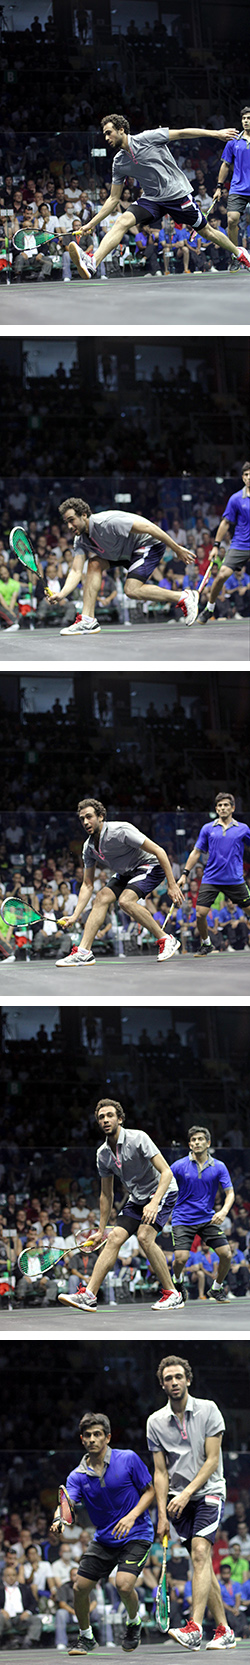 In the sequence of photos above, notice how Ramy  Ashour (in gray) moves onto, and away from, the  ball in a way that leaves him in excellent position to  respond to whatever his opponent throws at him,  all while making a clear path for his opponent.